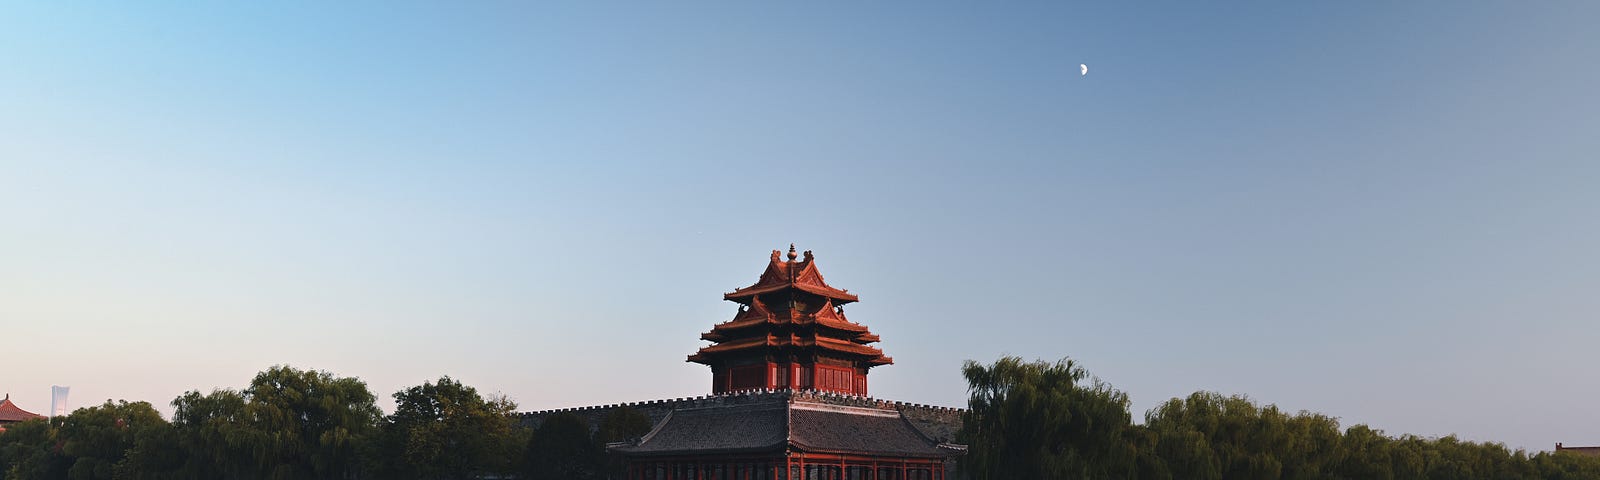 Forbidden City Tower in Beijing, China in the evening.